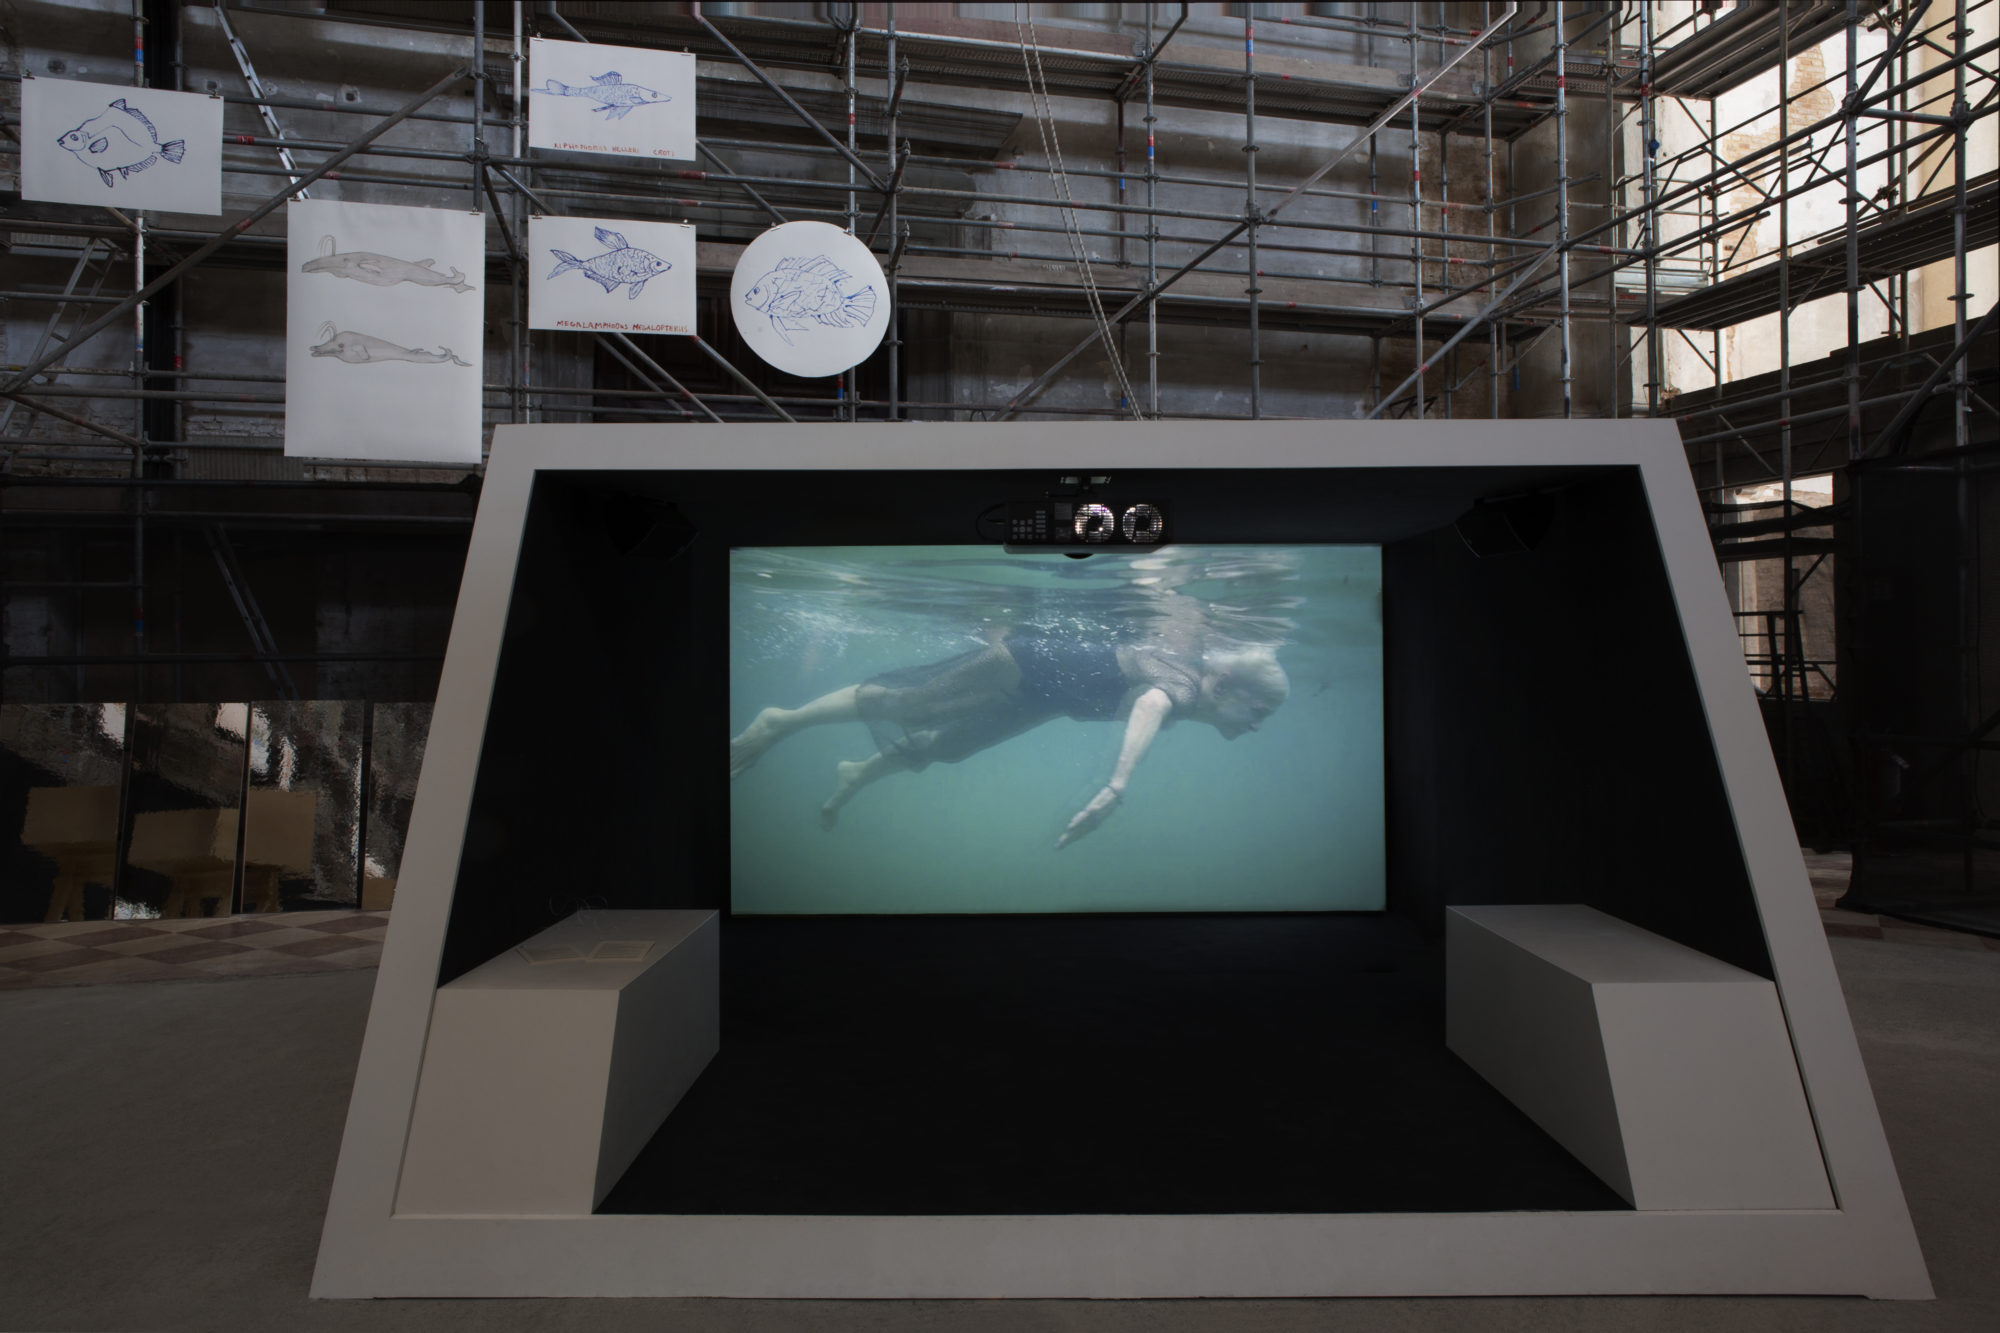 Installation view of a video focused on a woman floating in water.